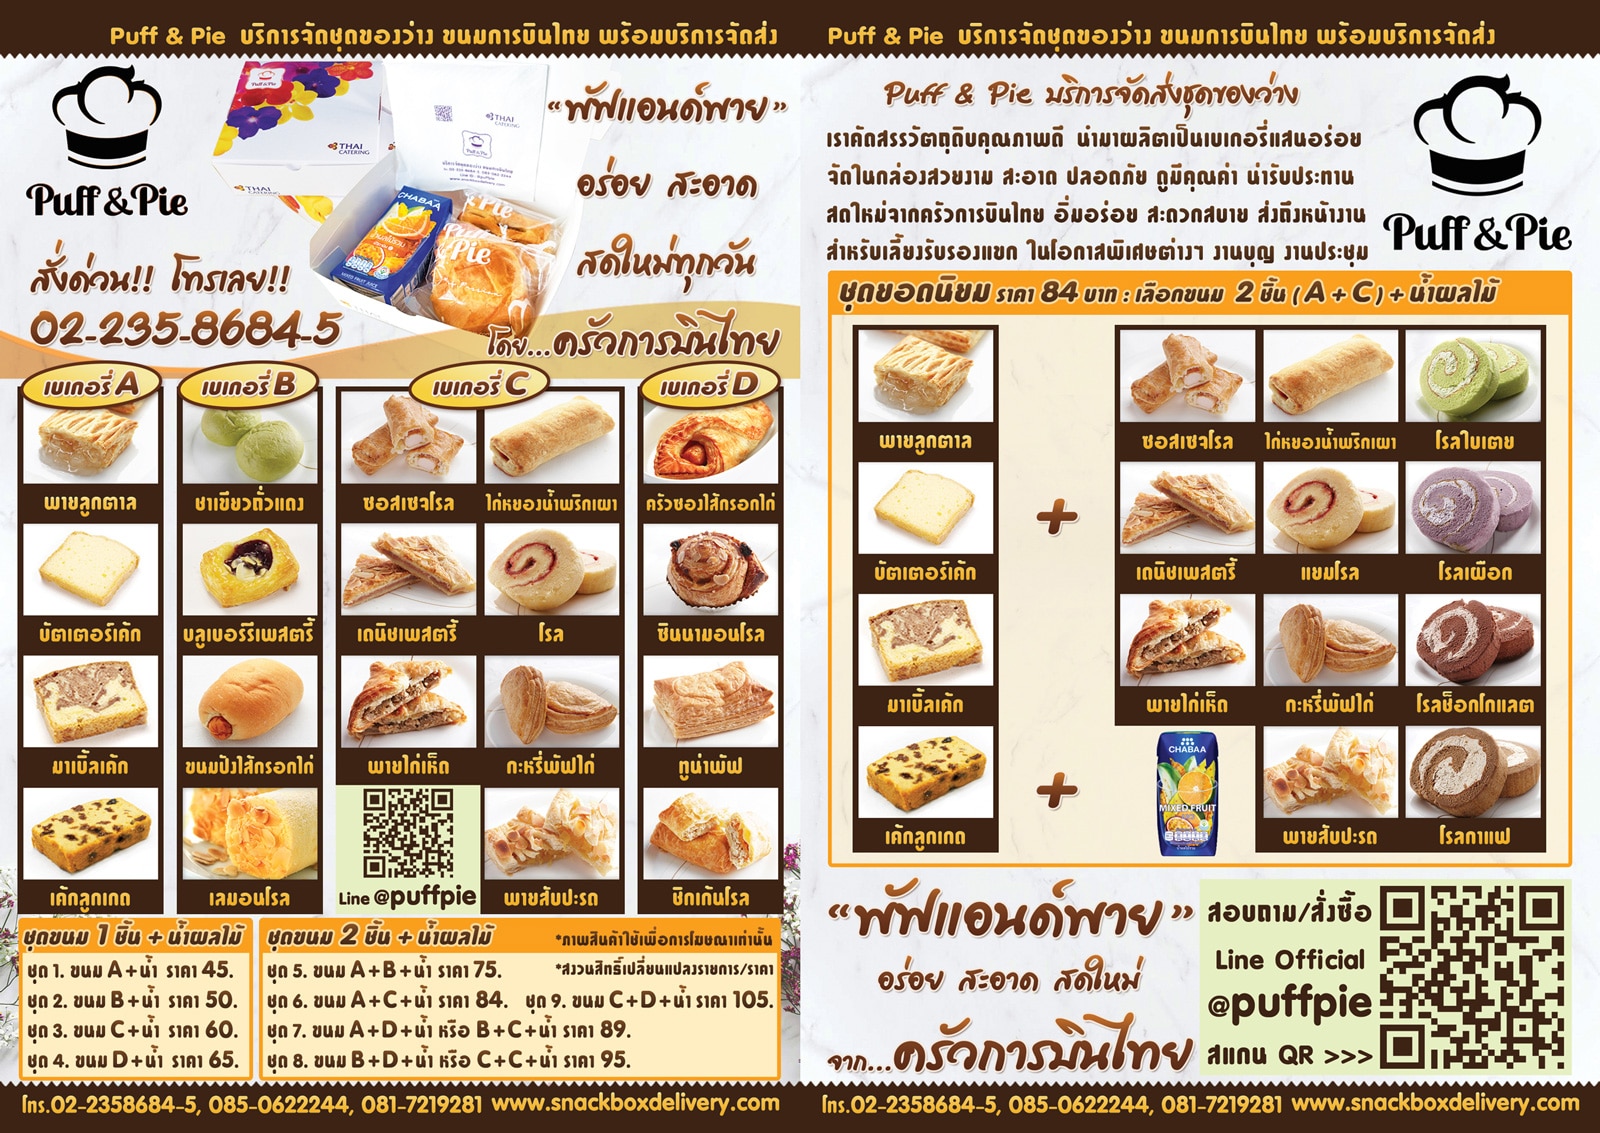 Snack Box Set - Puff & Pie - Supreme Bakery Delight by Thai Catering